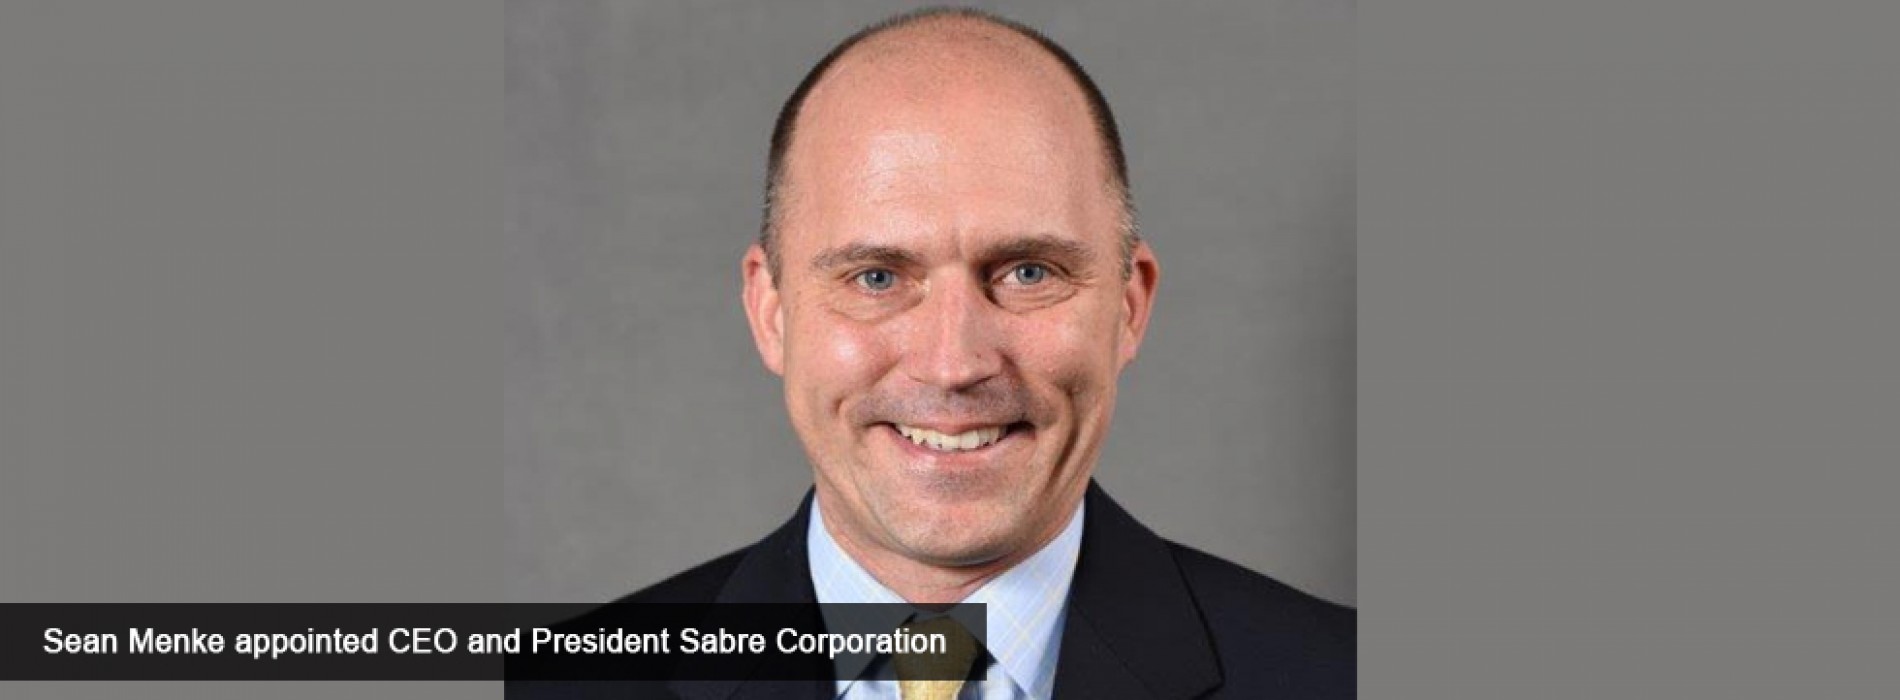 Sabre Corporation announces appointment of Sean Menke as President and CEO